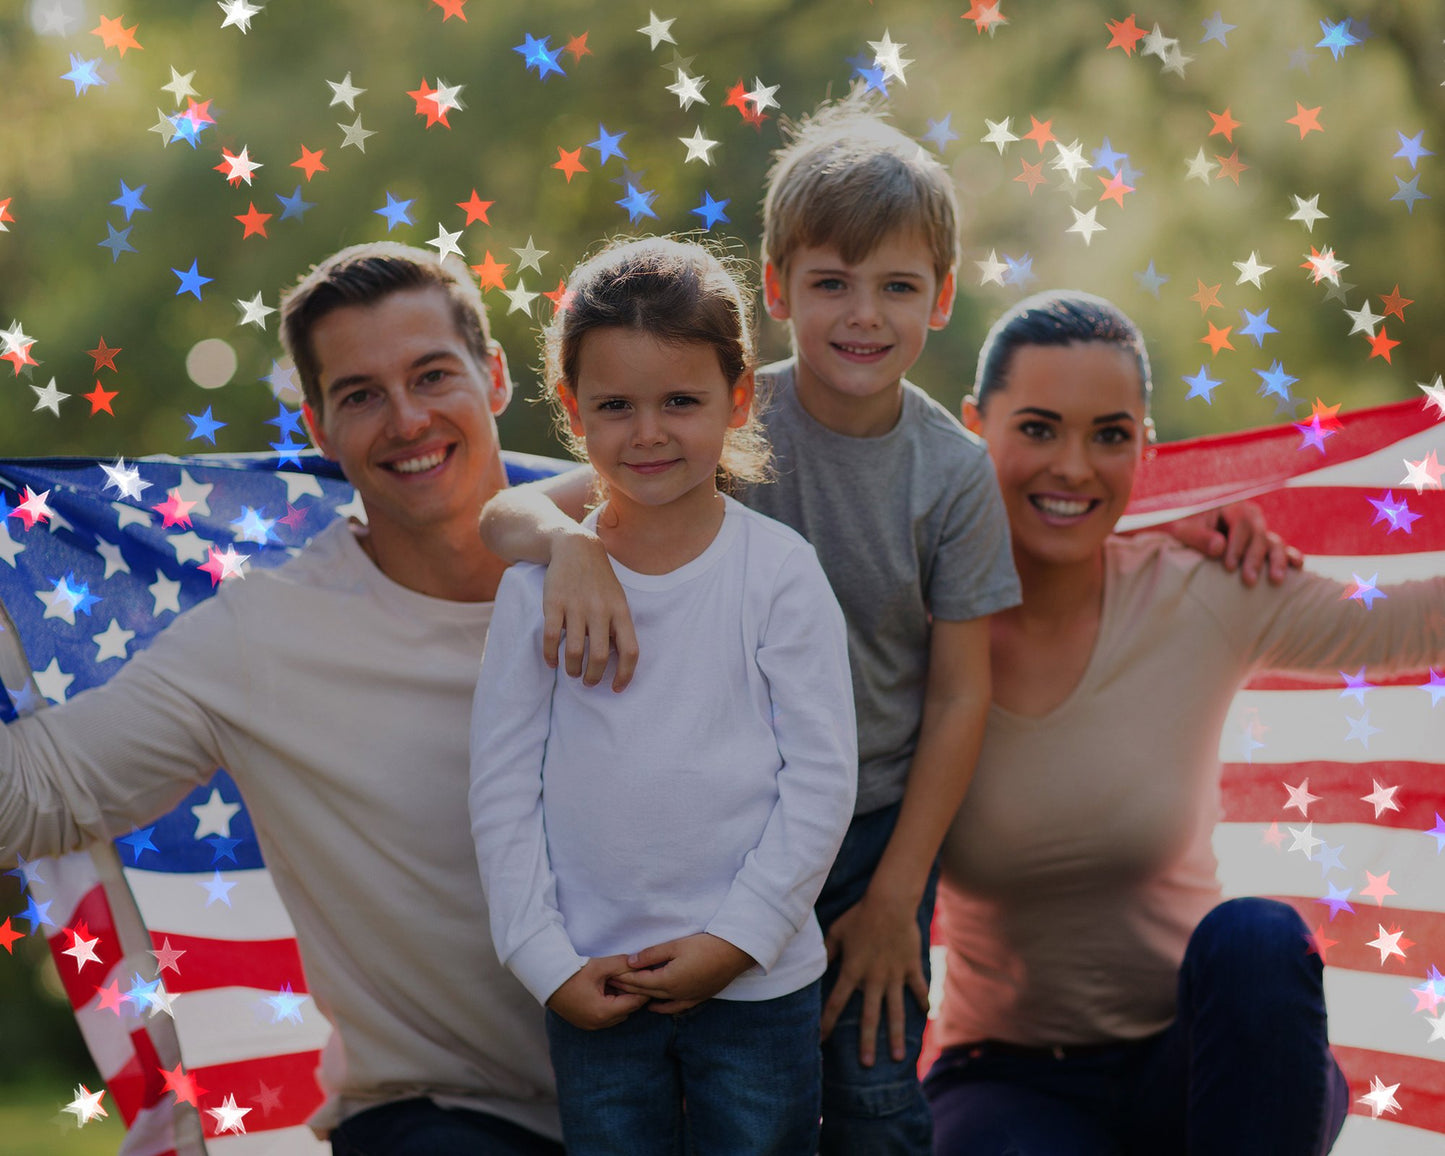 4th of July Patriotic Bokeh Stars Photoshop Overlays - Photoshop Overlays, Digital Backgrounds and Lightroom Presets